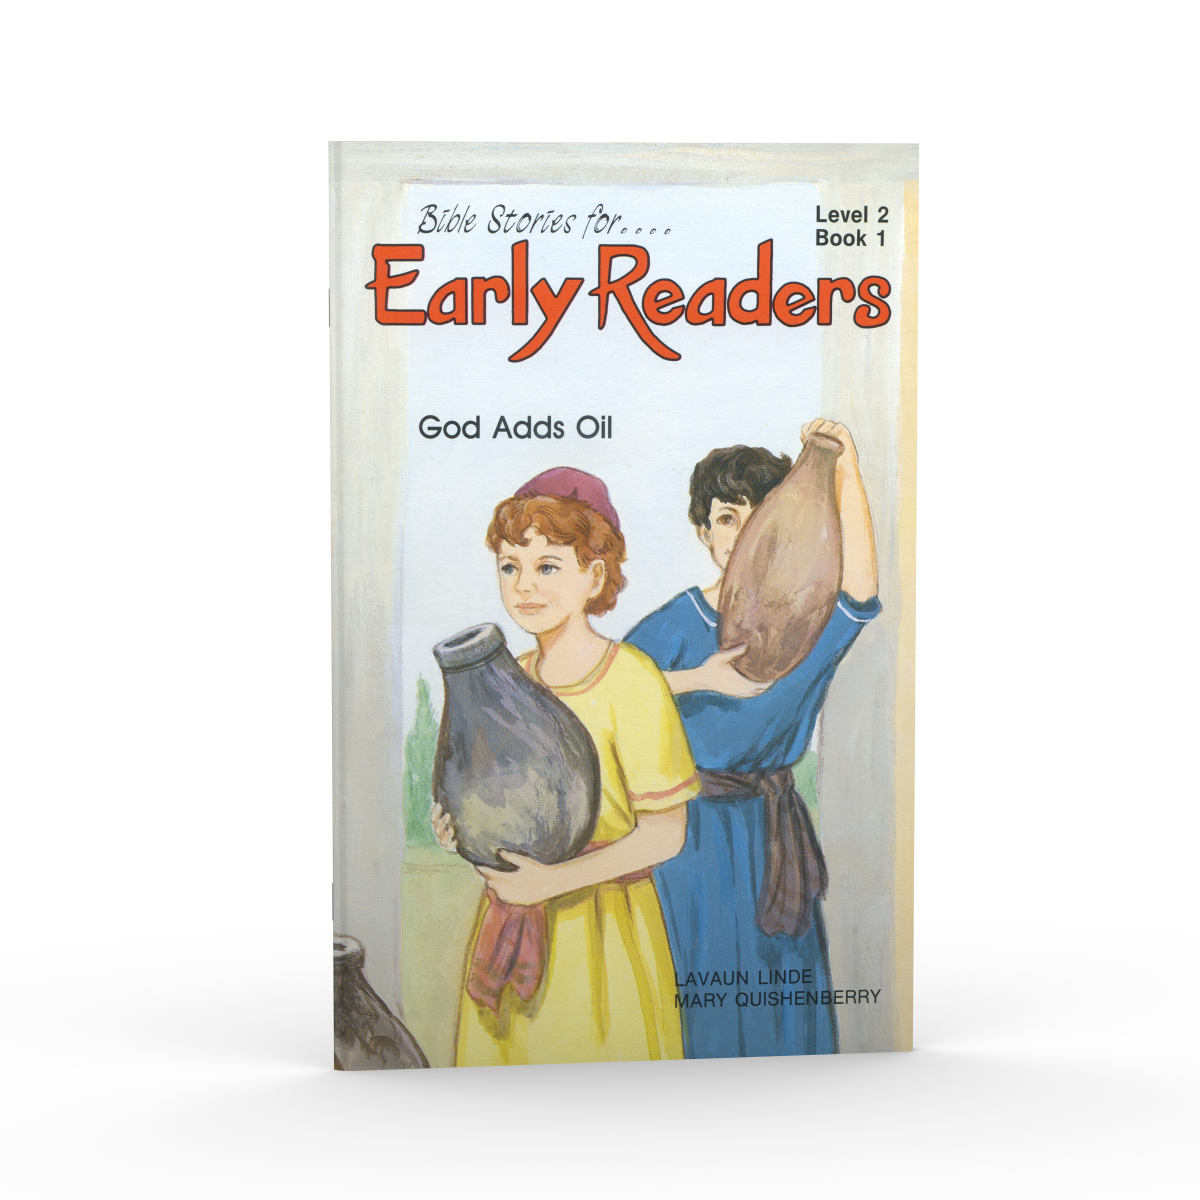 God Adds Oil (Bible Stories for Early Readers – Level 2, Book 1)